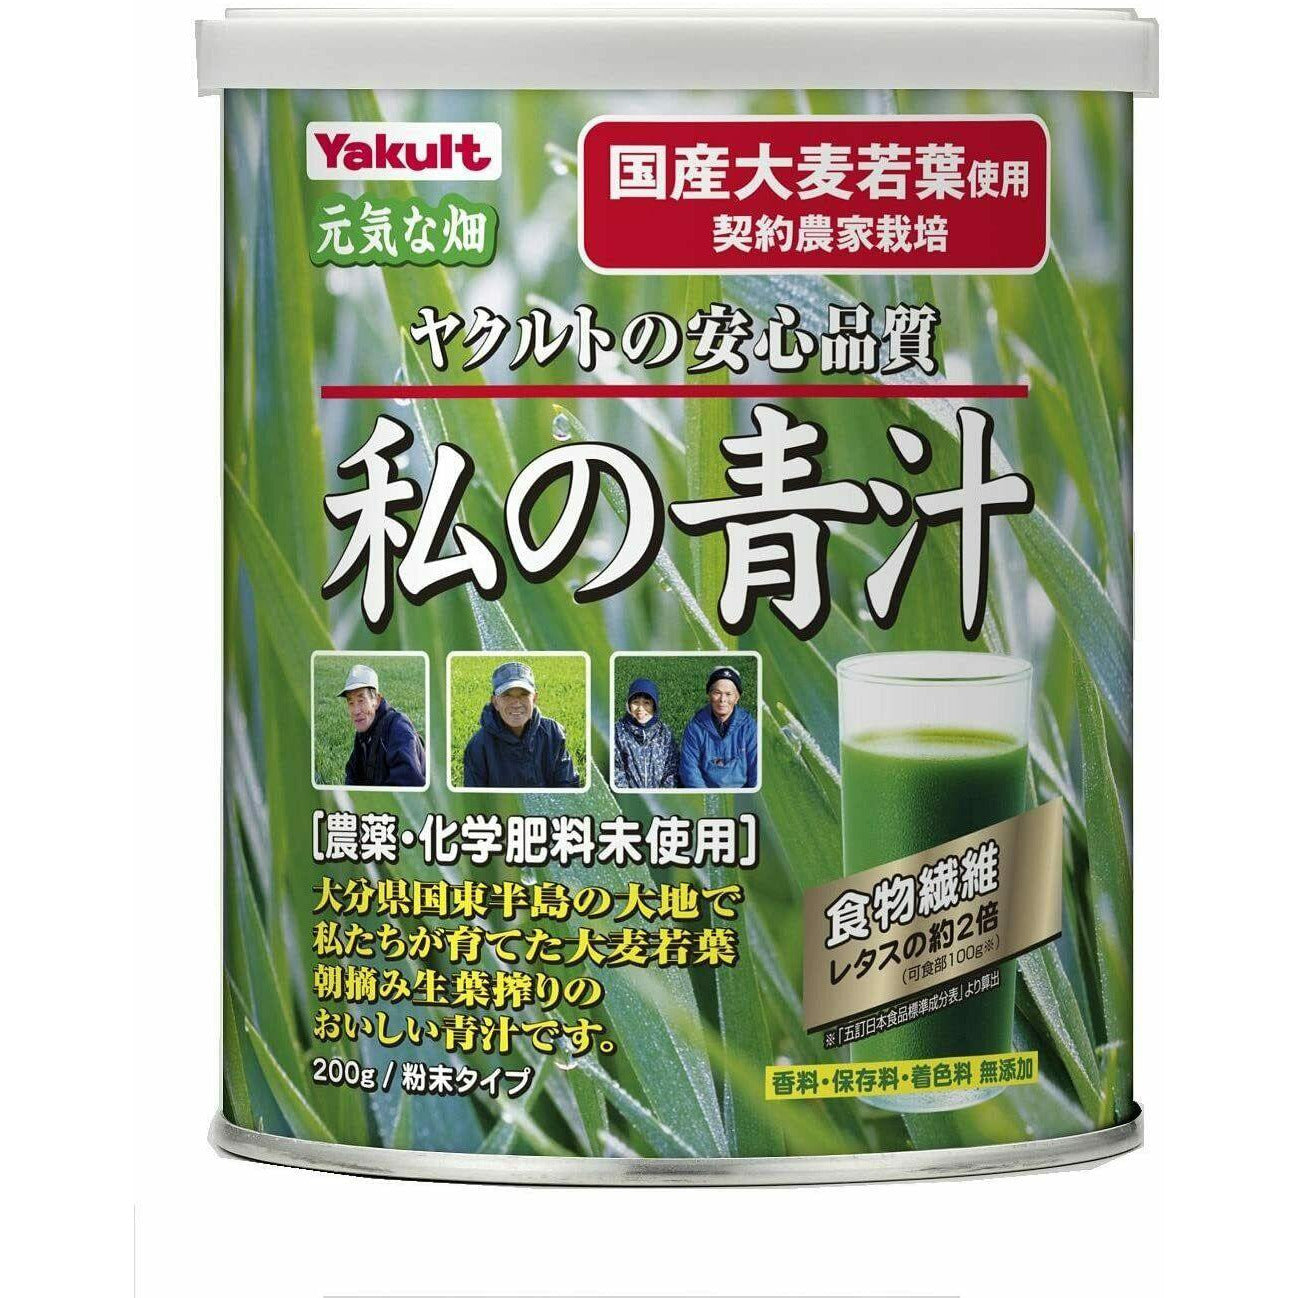  Yakult My Green juice 200g Barley young leaves No pesticides used 